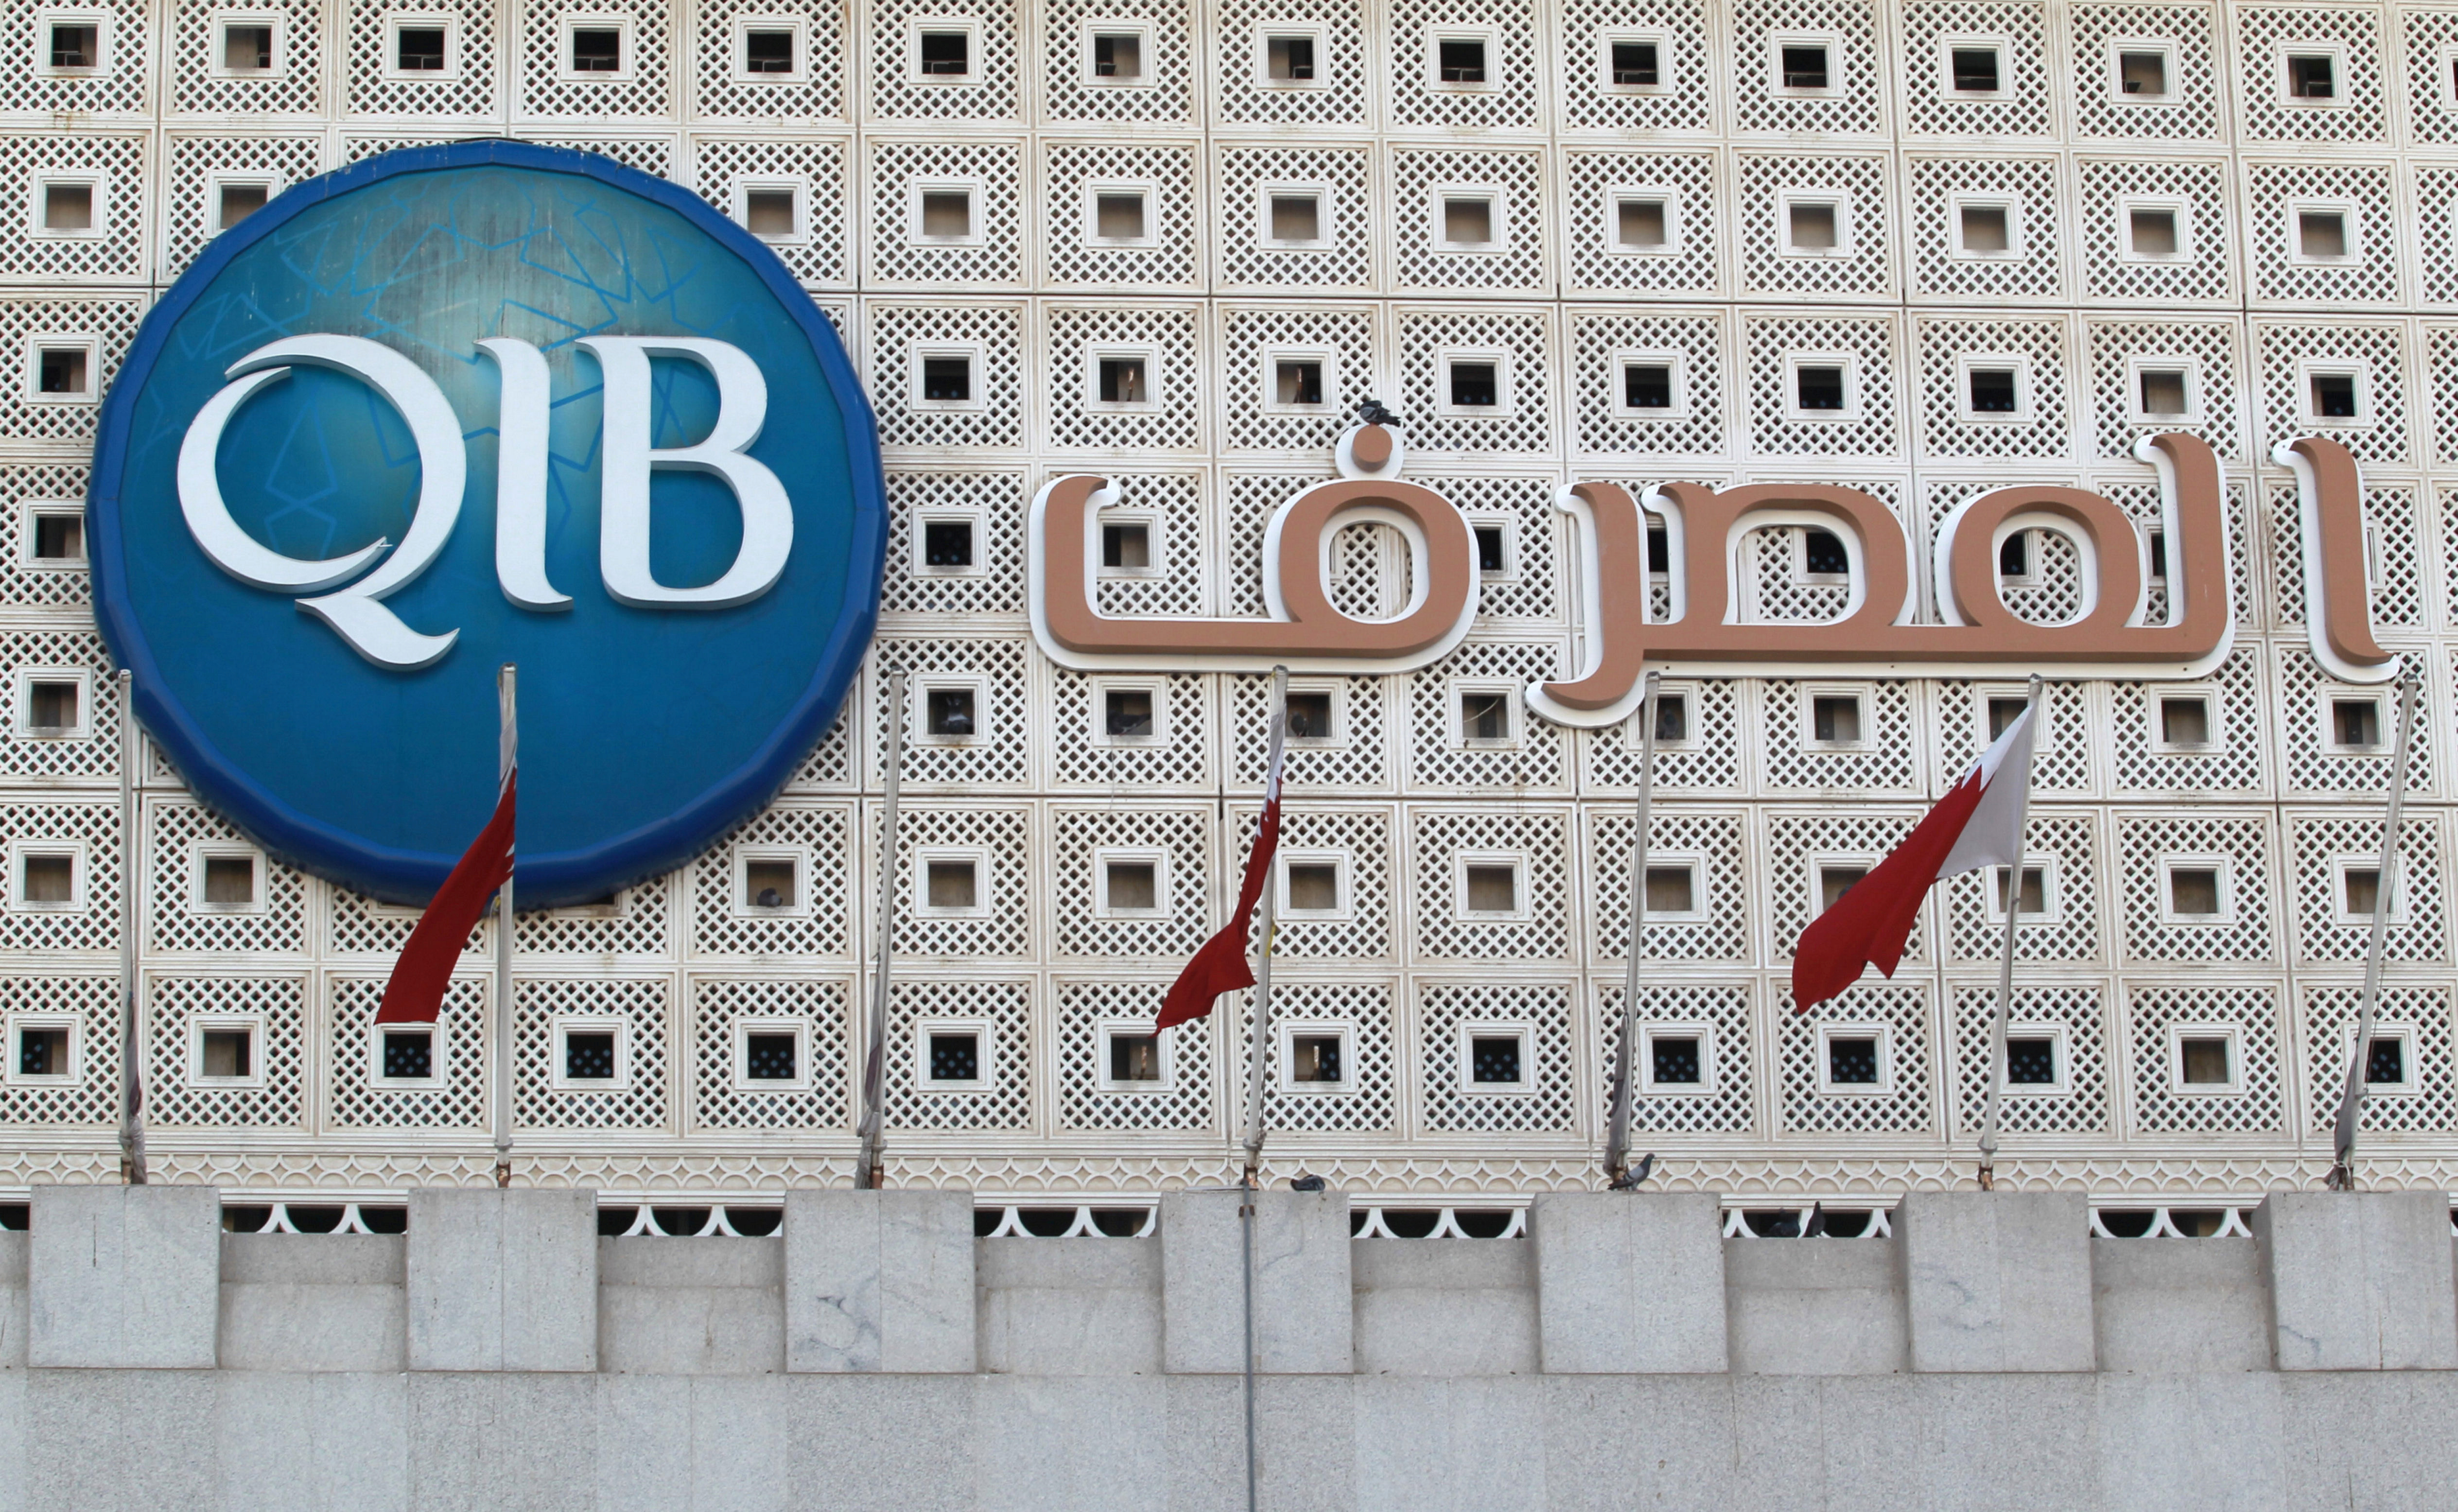 Qatar Islamic bank is pictured in Doha